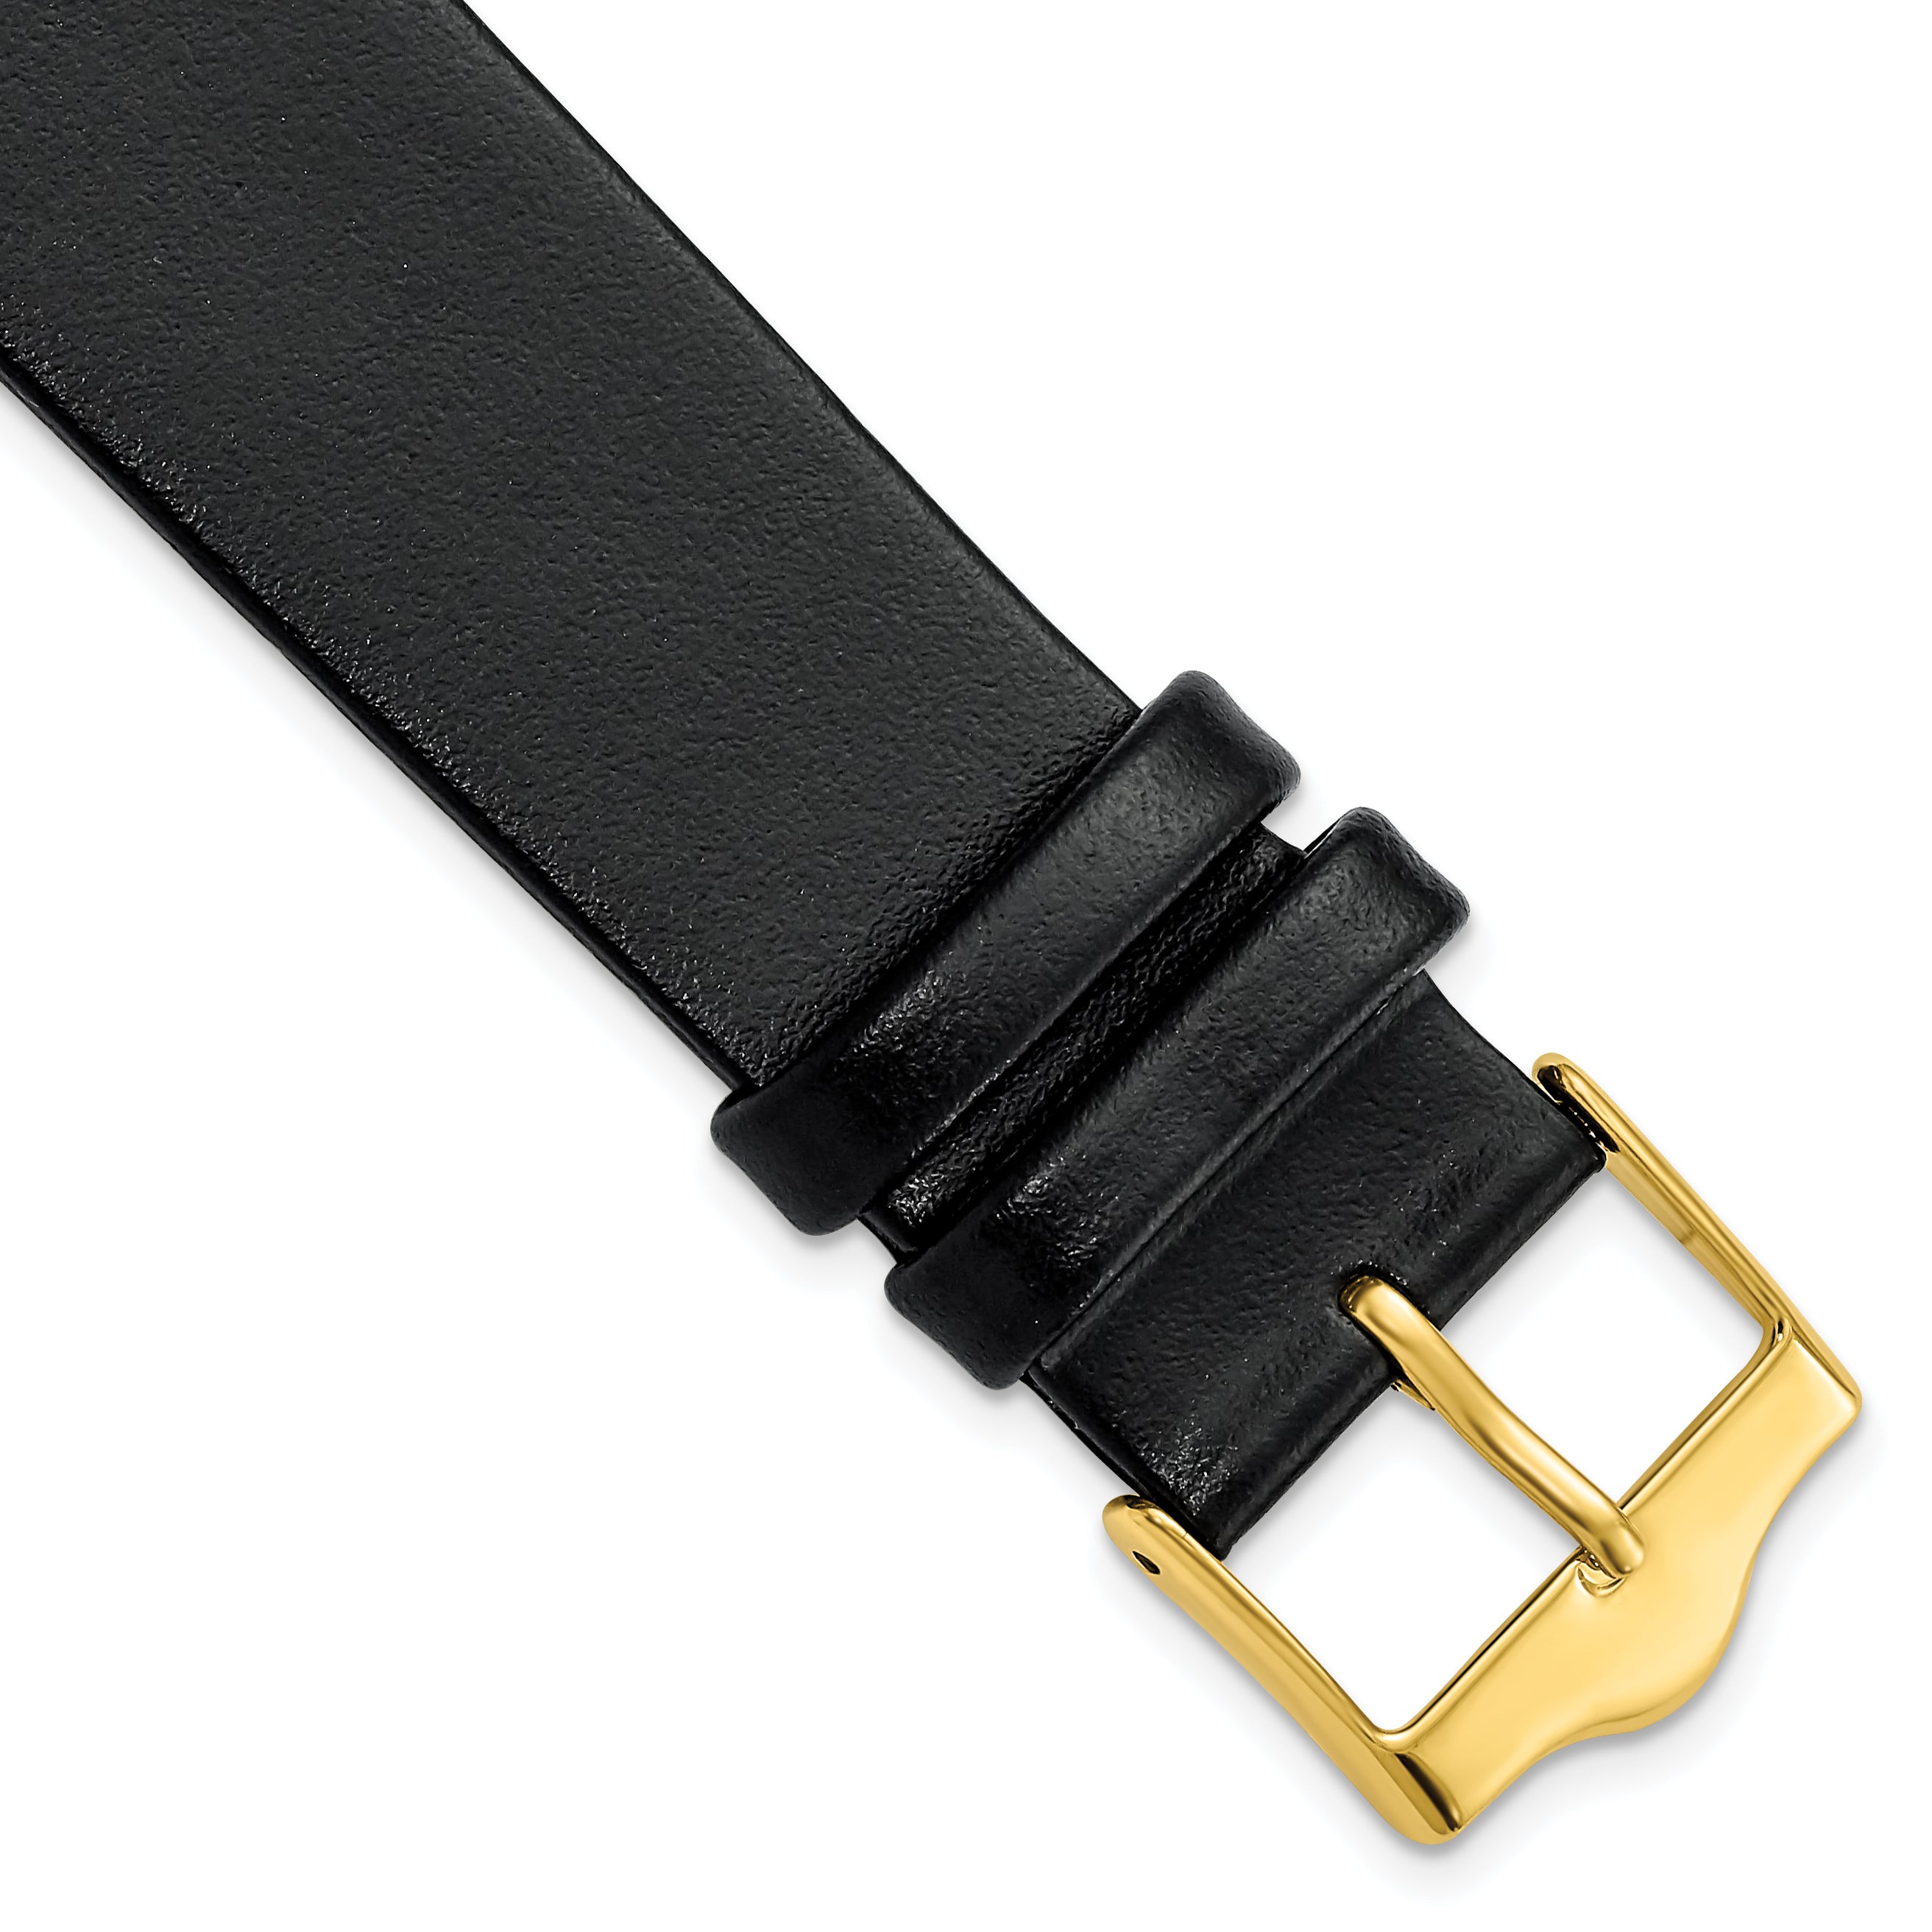 DeBeer 20mm Black Smooth Flat Leather with Gold-tone Buckle 7.5 inch Watch Band